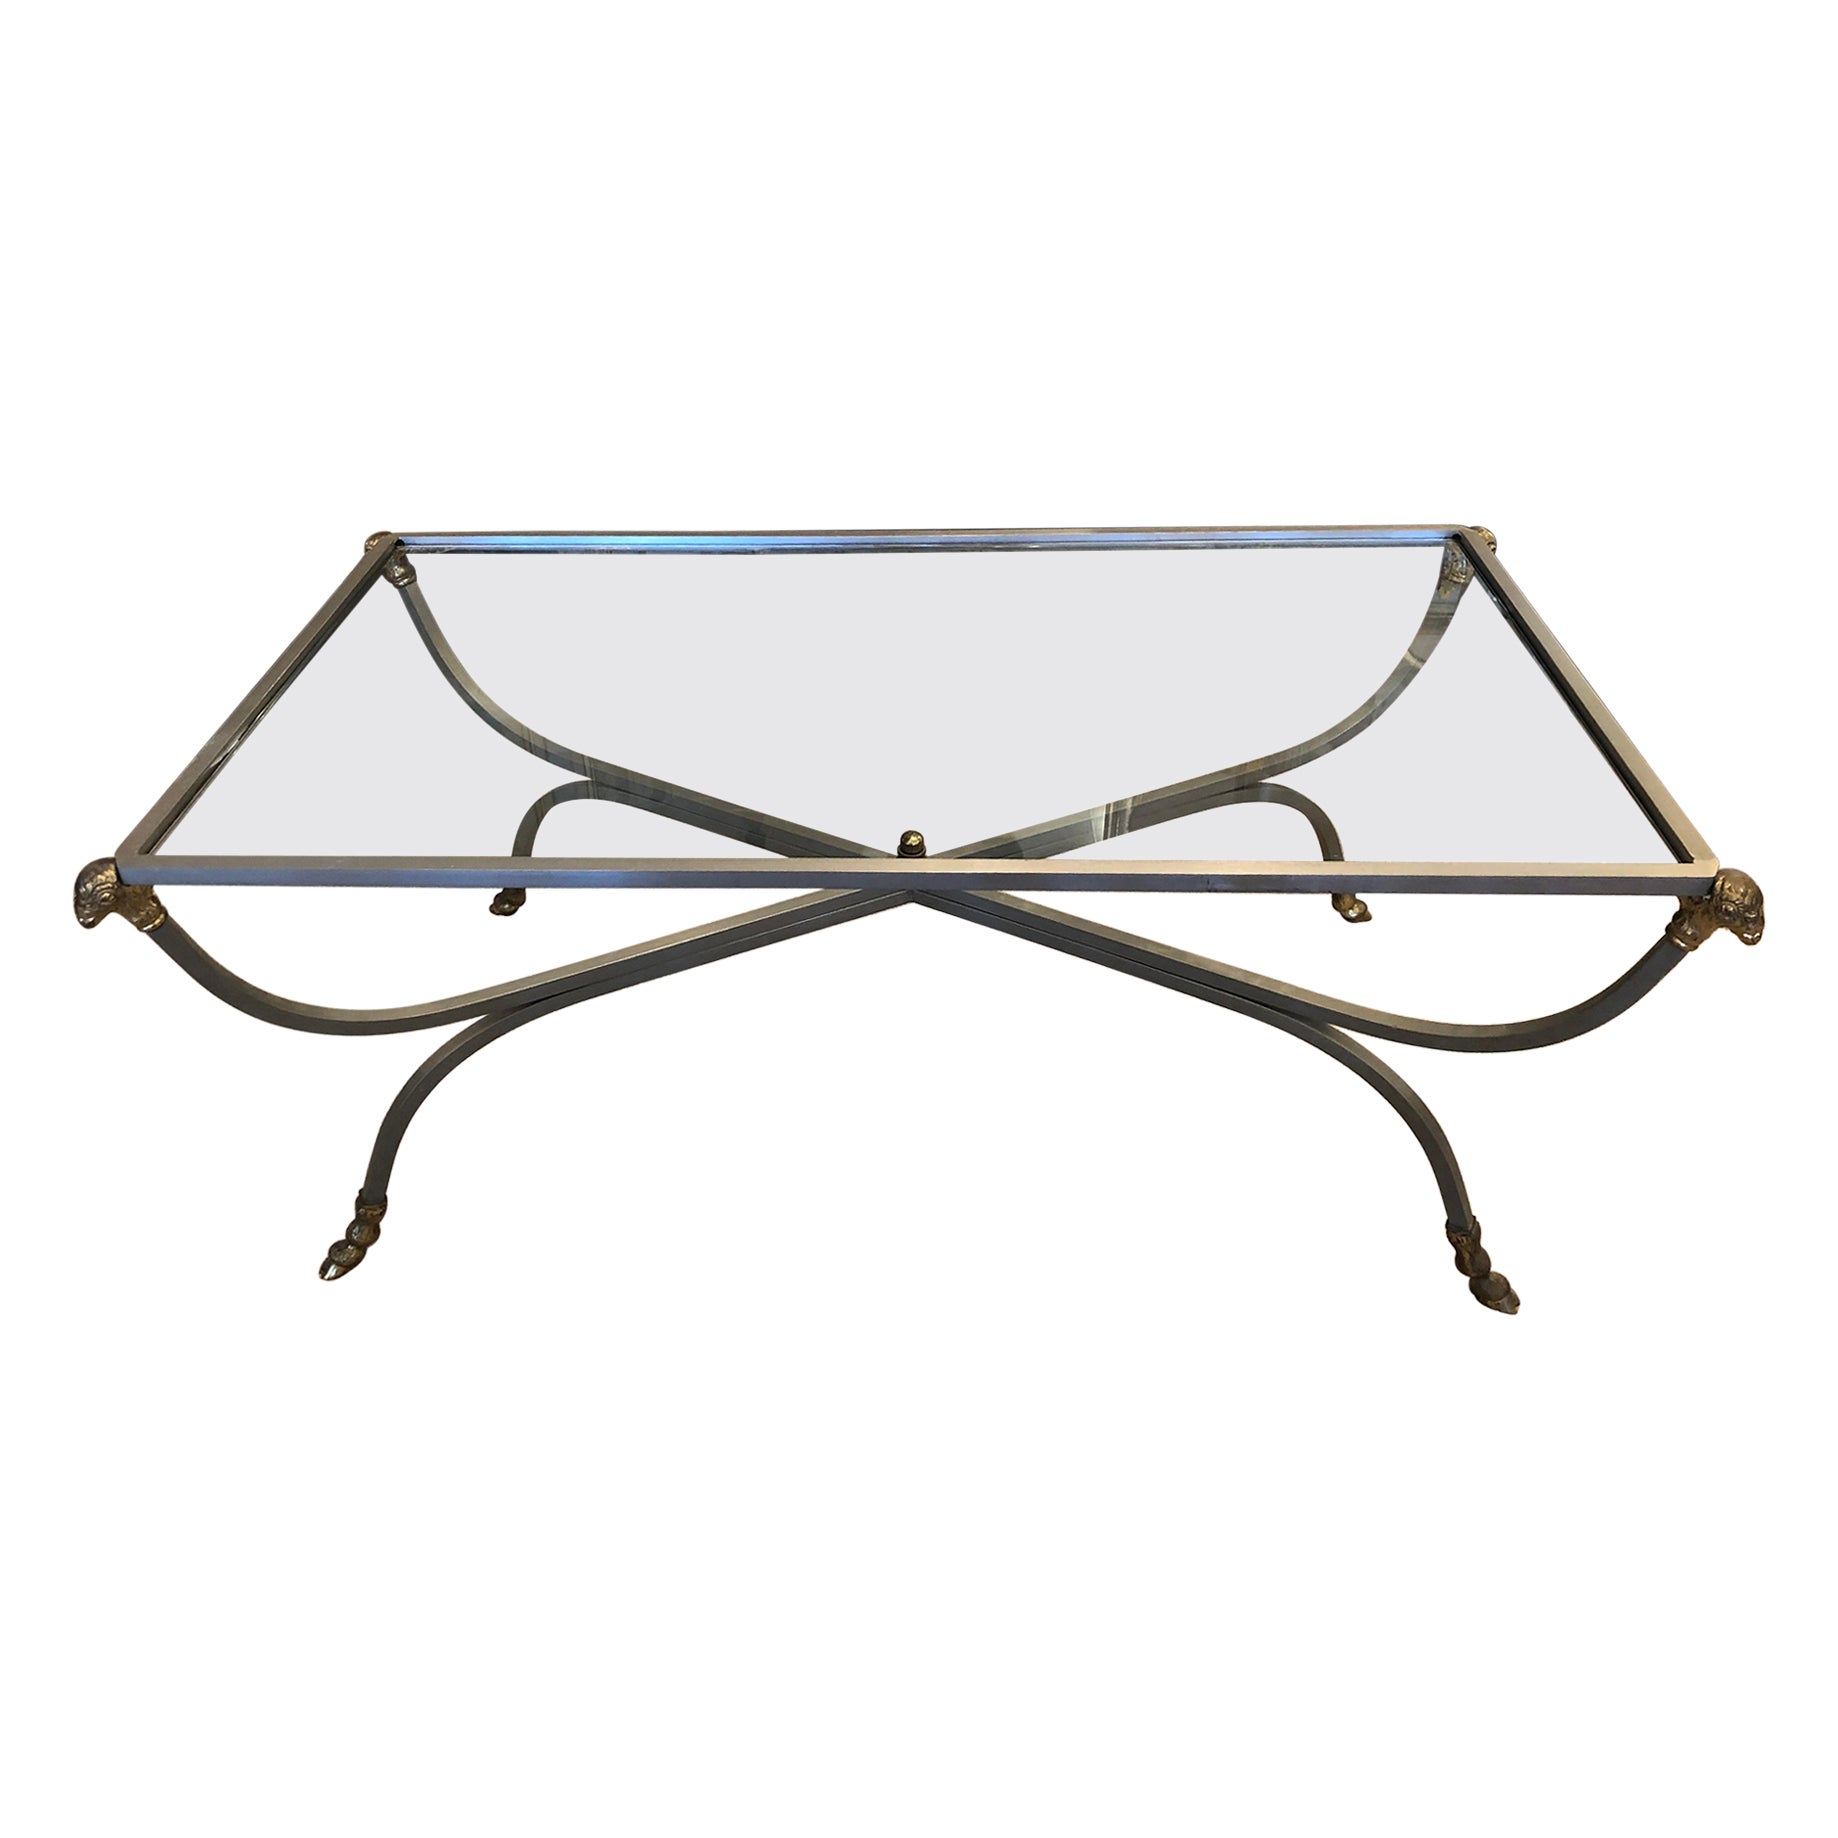  Vintage Maison Jansen Style Steel Brass and Glass Coffee Table